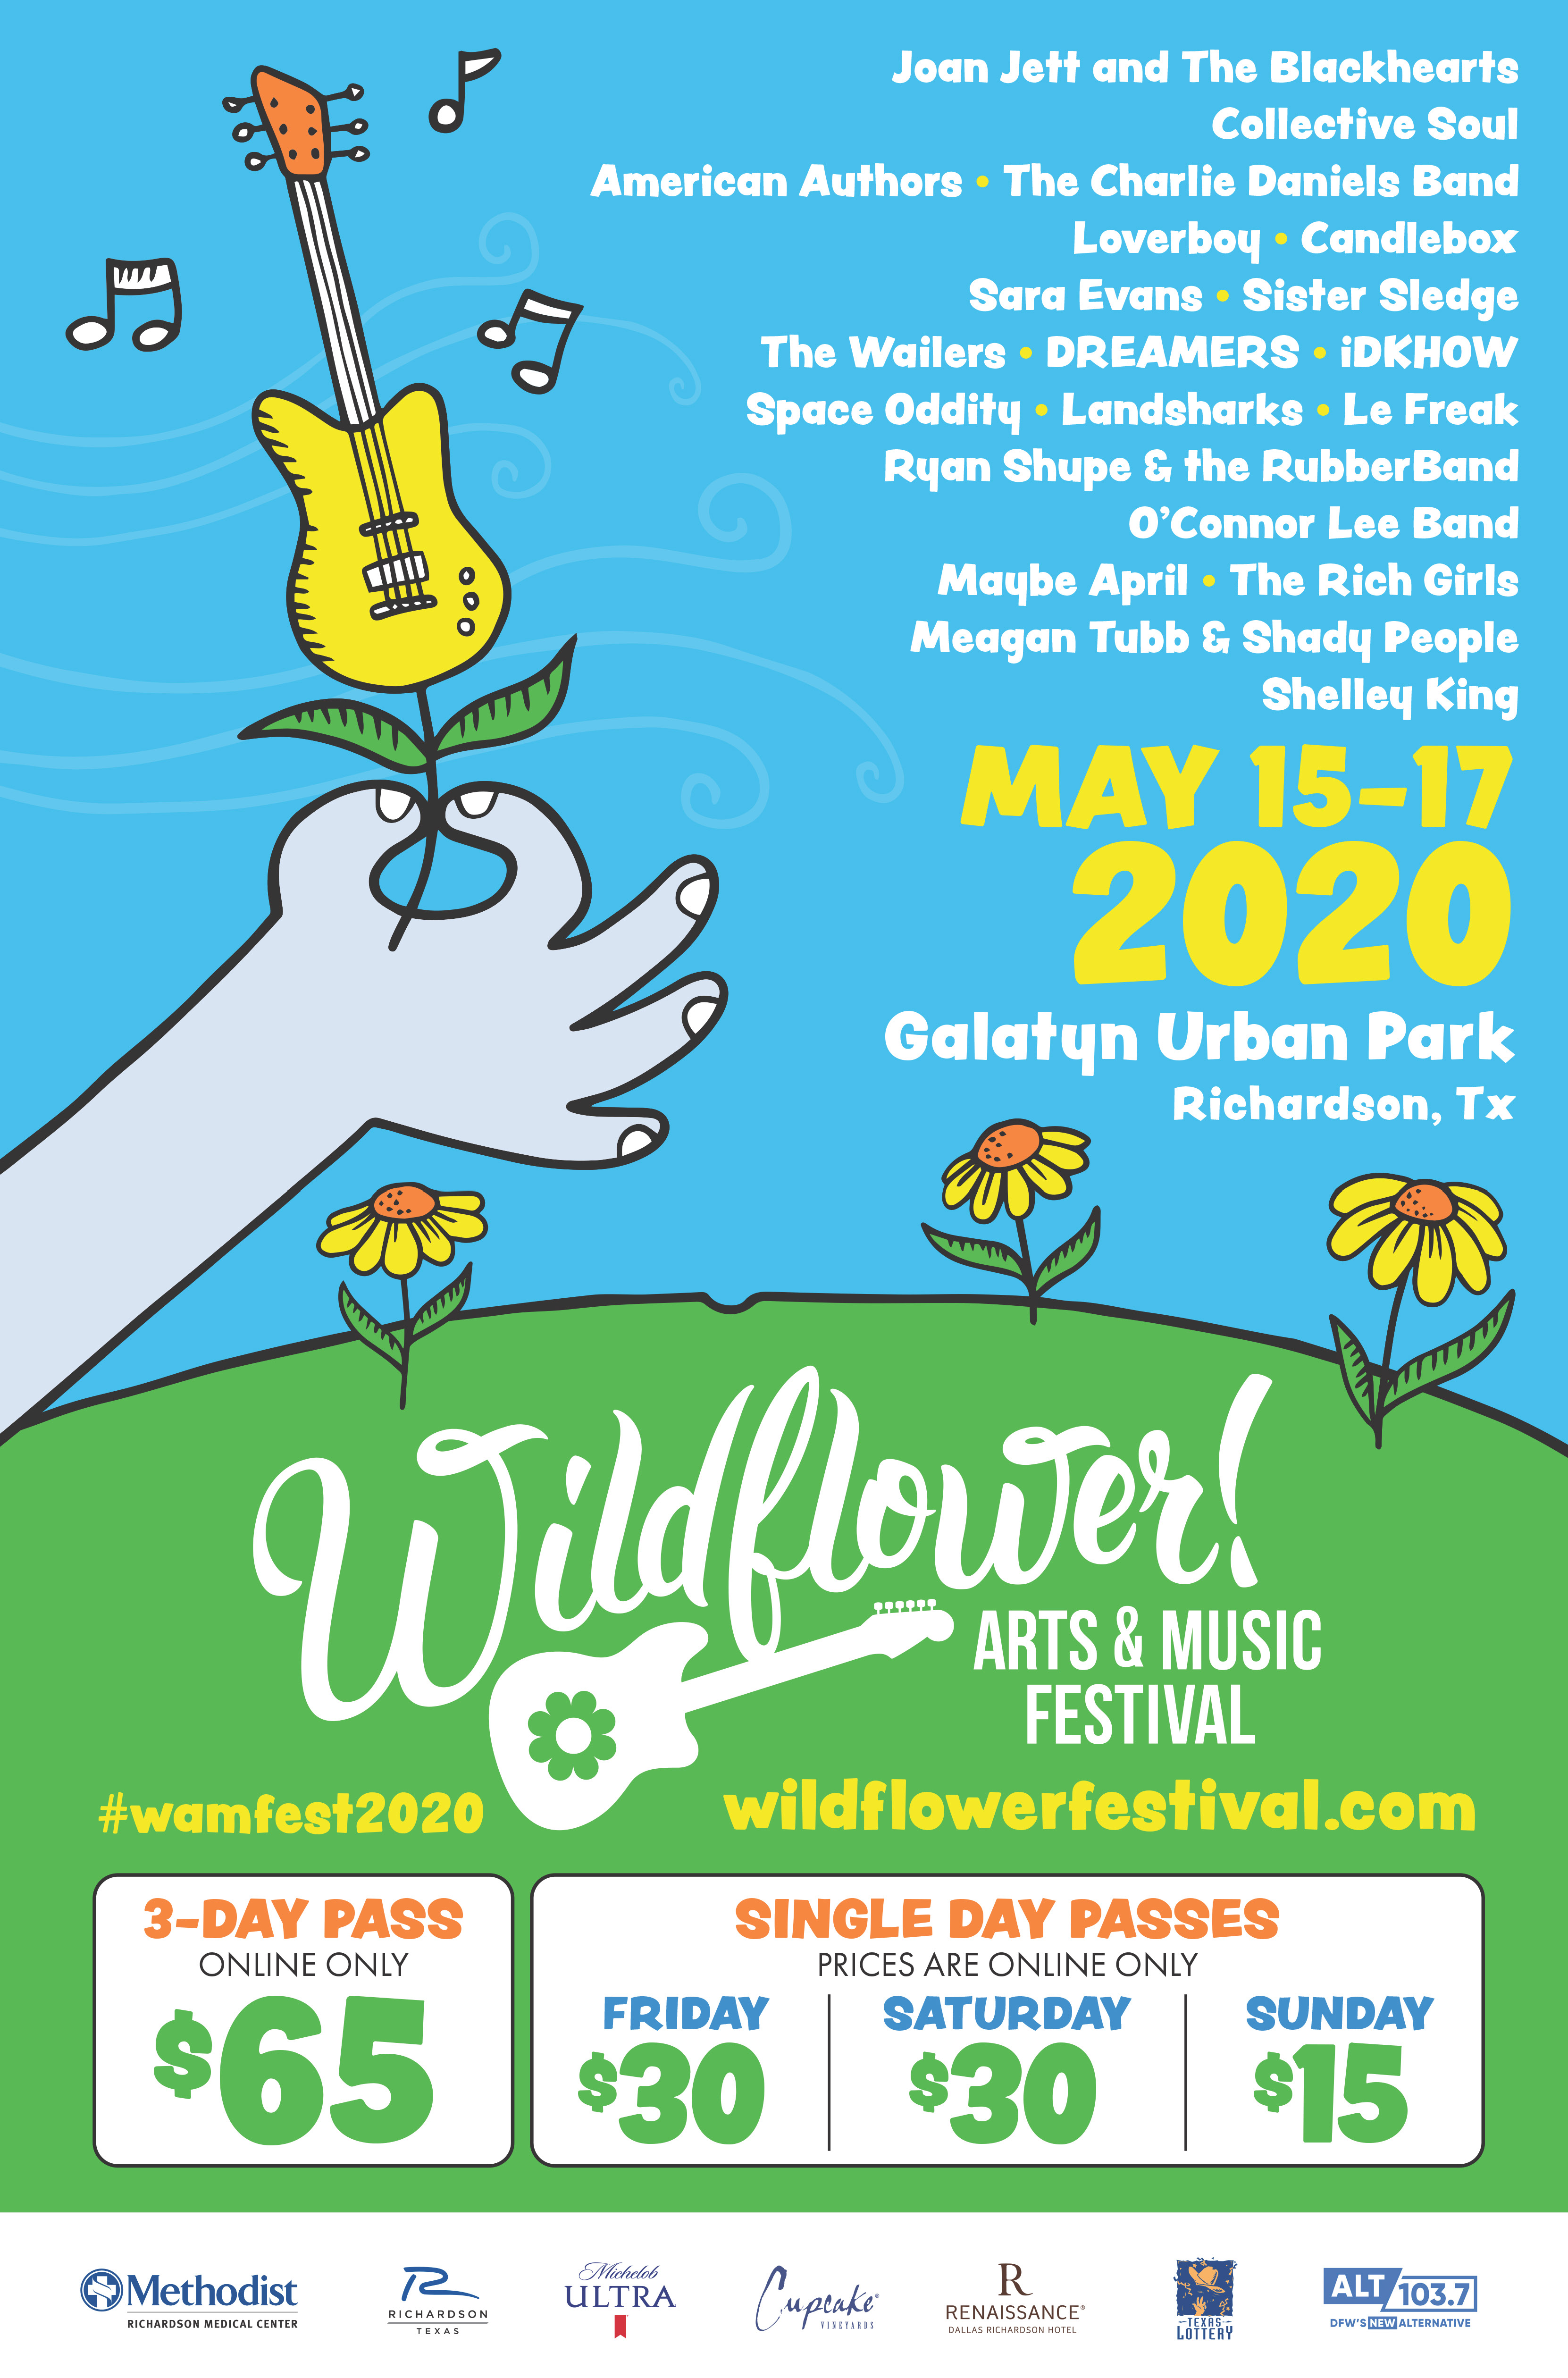 Headliners Announced to Rock Richardson's 28TH WILDFLOWER! ARTS & MUSIC